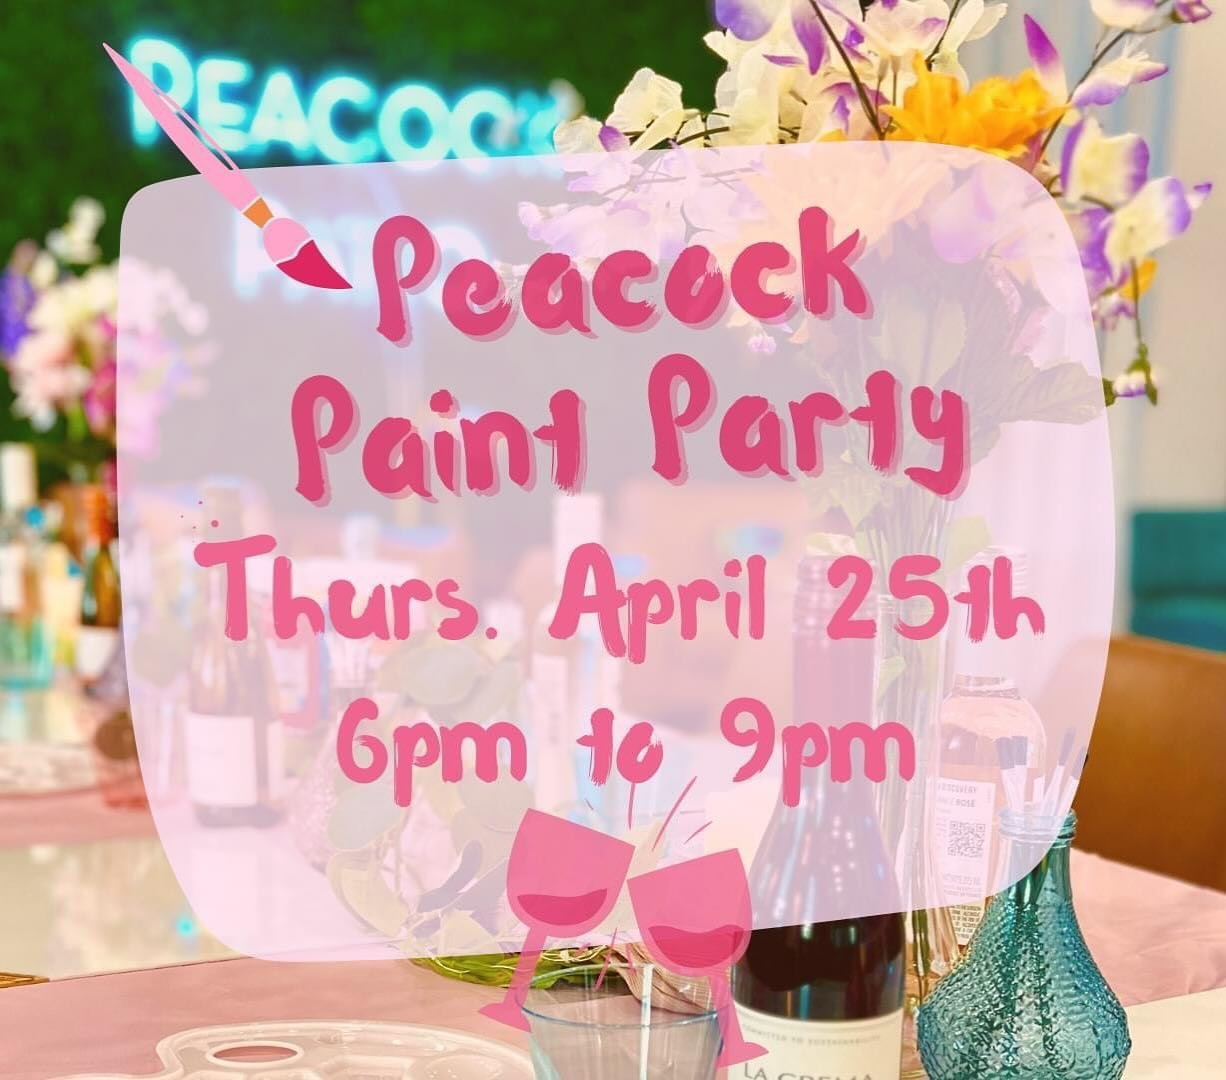 Get ready to unleash your inner artist at our paint party this Thursday! 🎨🎉 Purchase a drink and join in the fun-filled creativity. Limited supplies are available, or feel free to bring your own. Let&rsquo;s get colorful together! 🦚